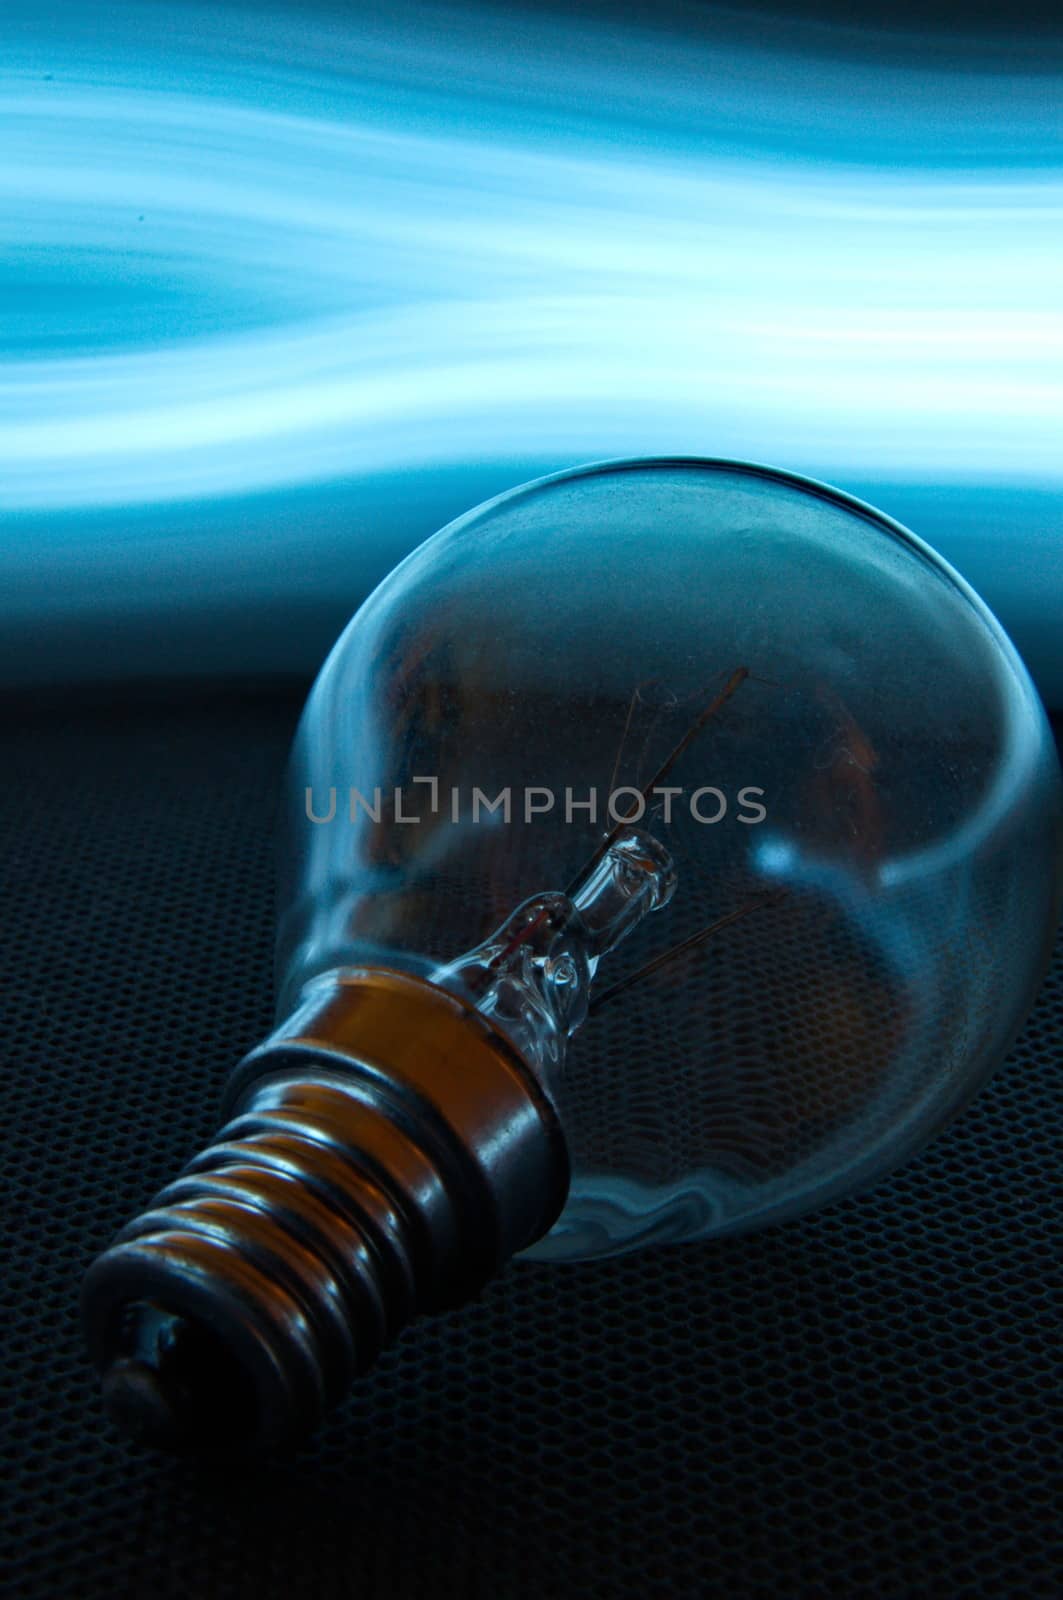 Lightbulb wiht enlighted background by anderm